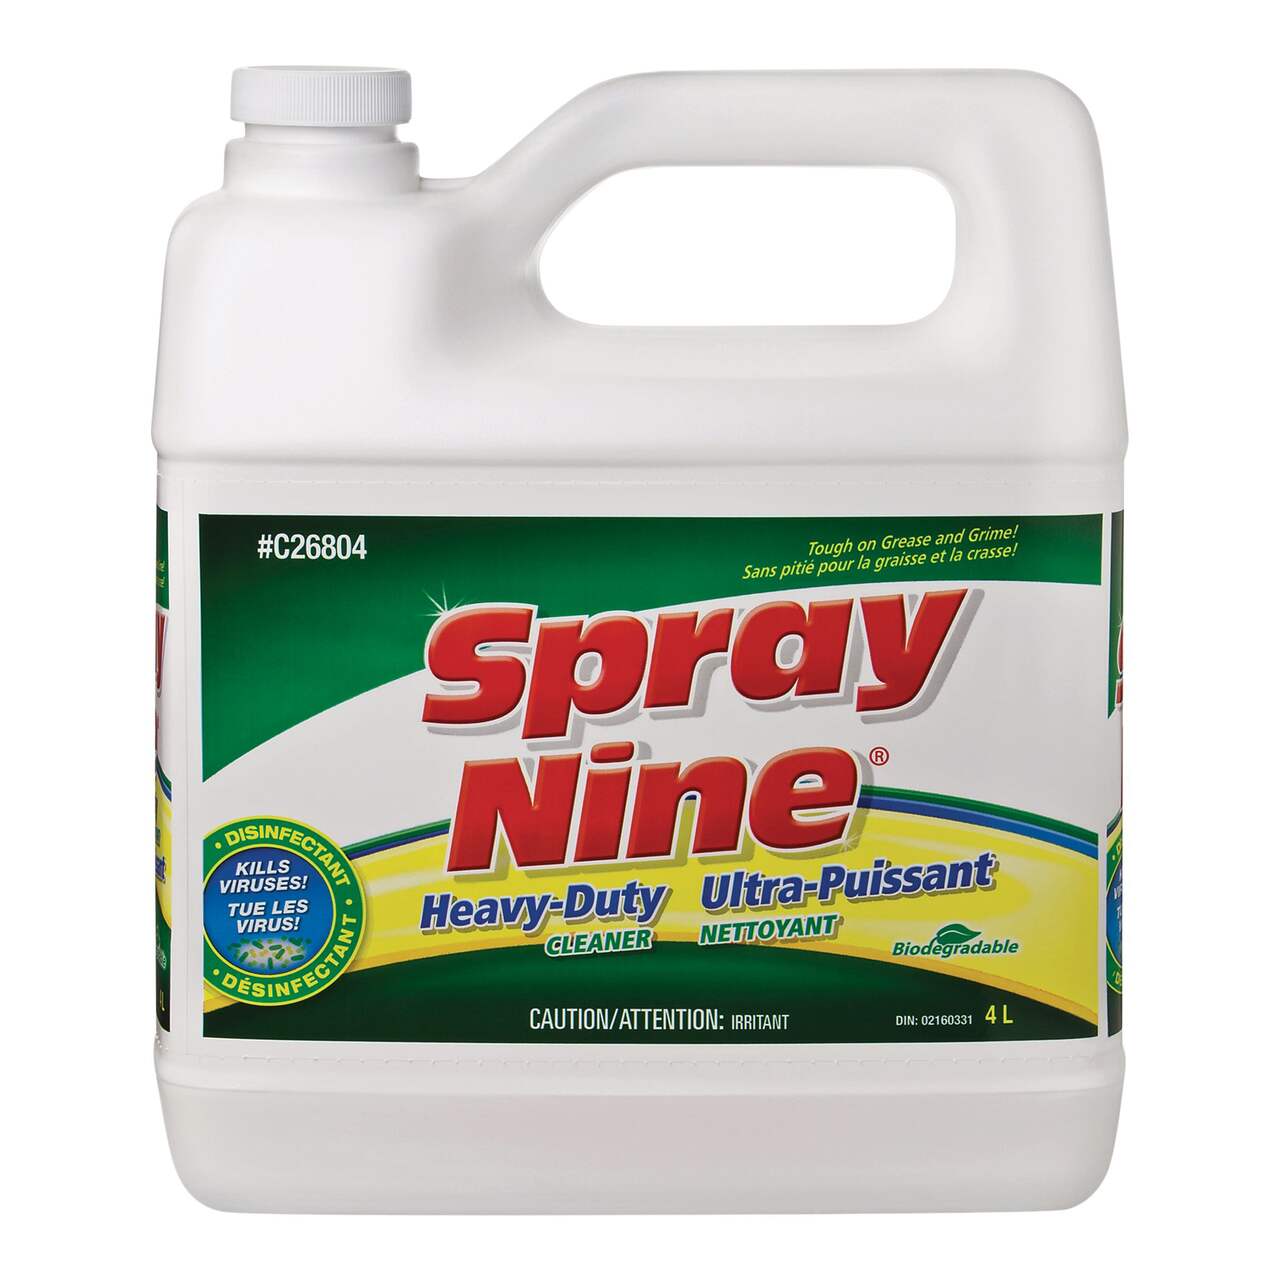 https://media-www.canadiantire.ca/product/automotive/car-care-accessories/auto-cleaning-chemicals/0390407/spray-nine-cleaner-4l-532585e7-b398-4f4f-9e9c-fcf769c3682a-jpgrendition.jpg?imdensity=1&imwidth=640&impolicy=mZoom